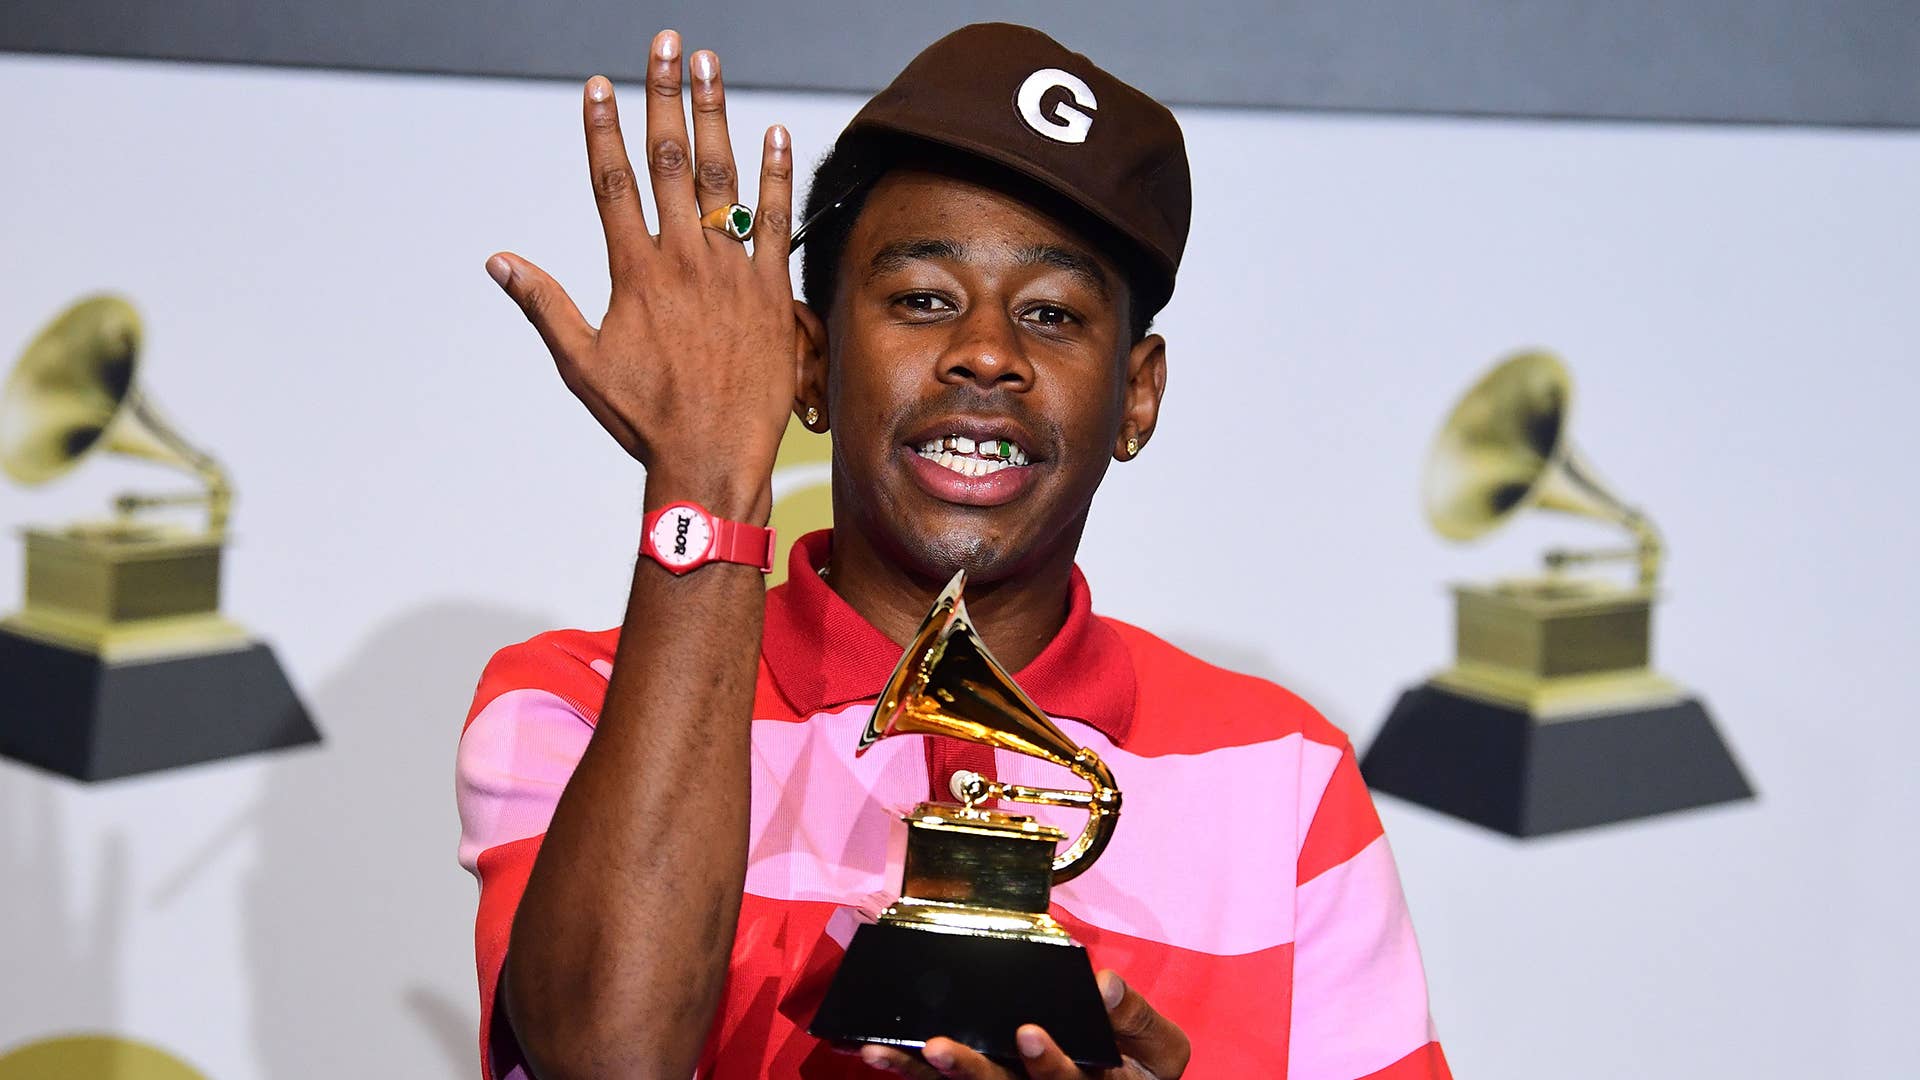 STREAMED: Tyler, The Creator Drops CALL ME IF YOU GET LOST